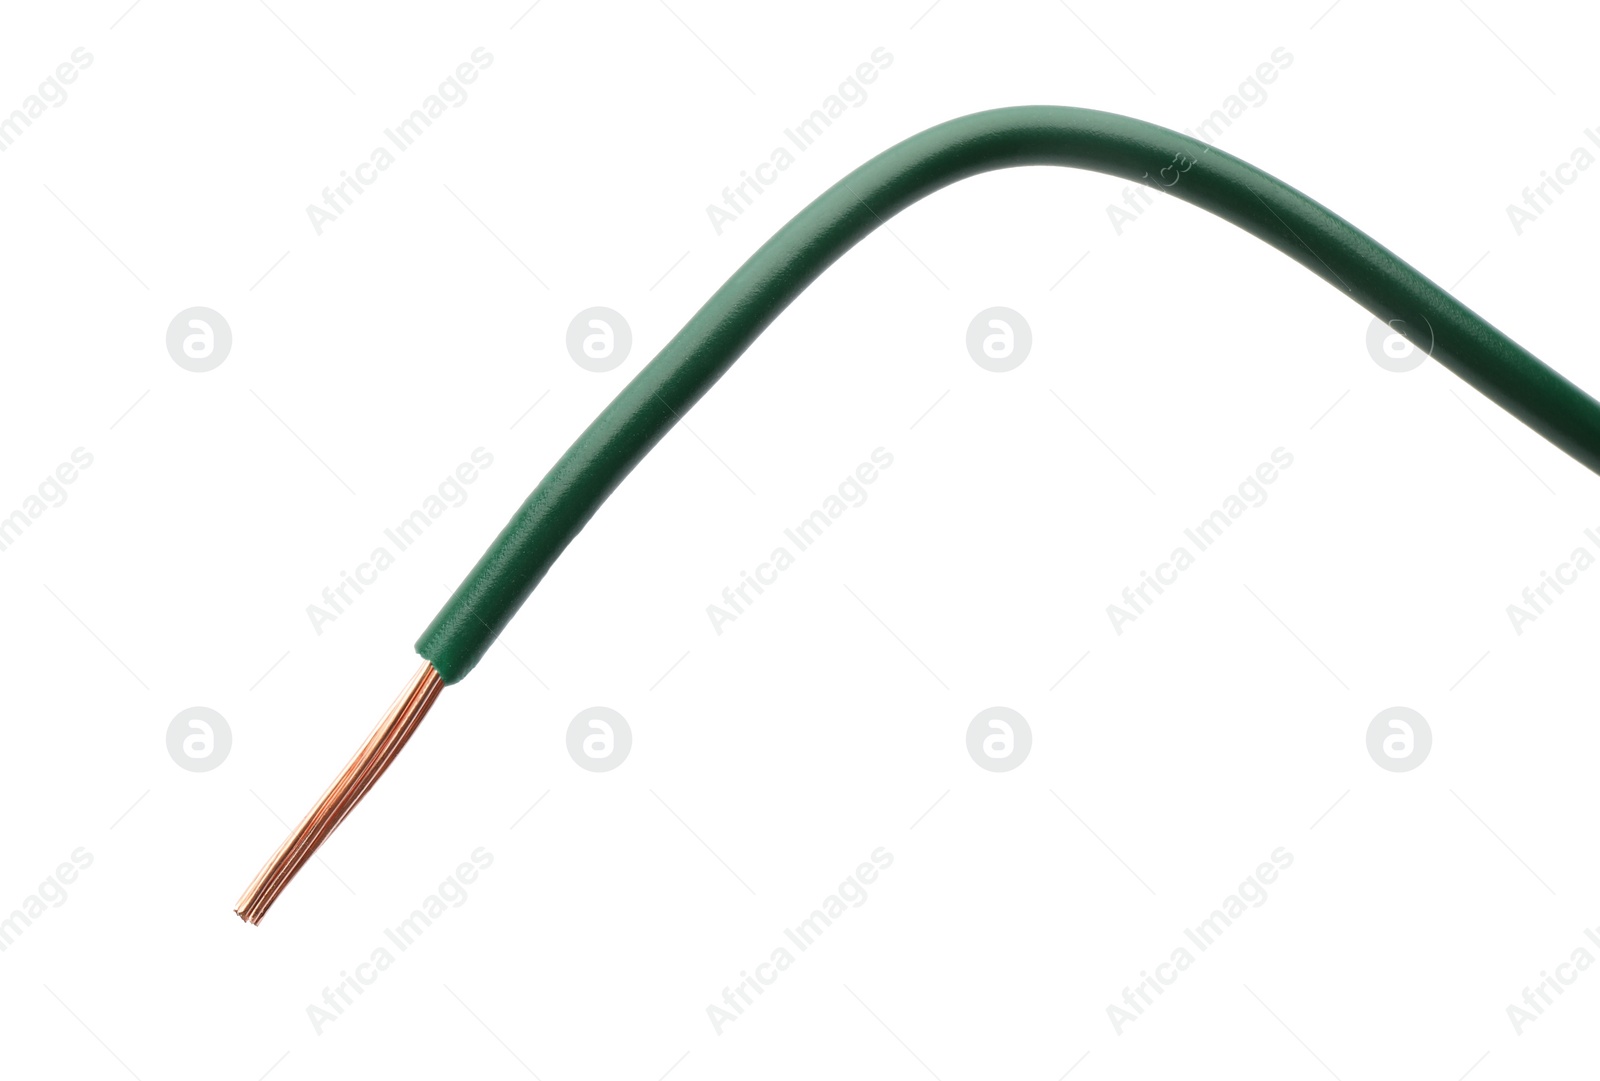 Photo of Stripped electrical wire with green insulation isolated on white